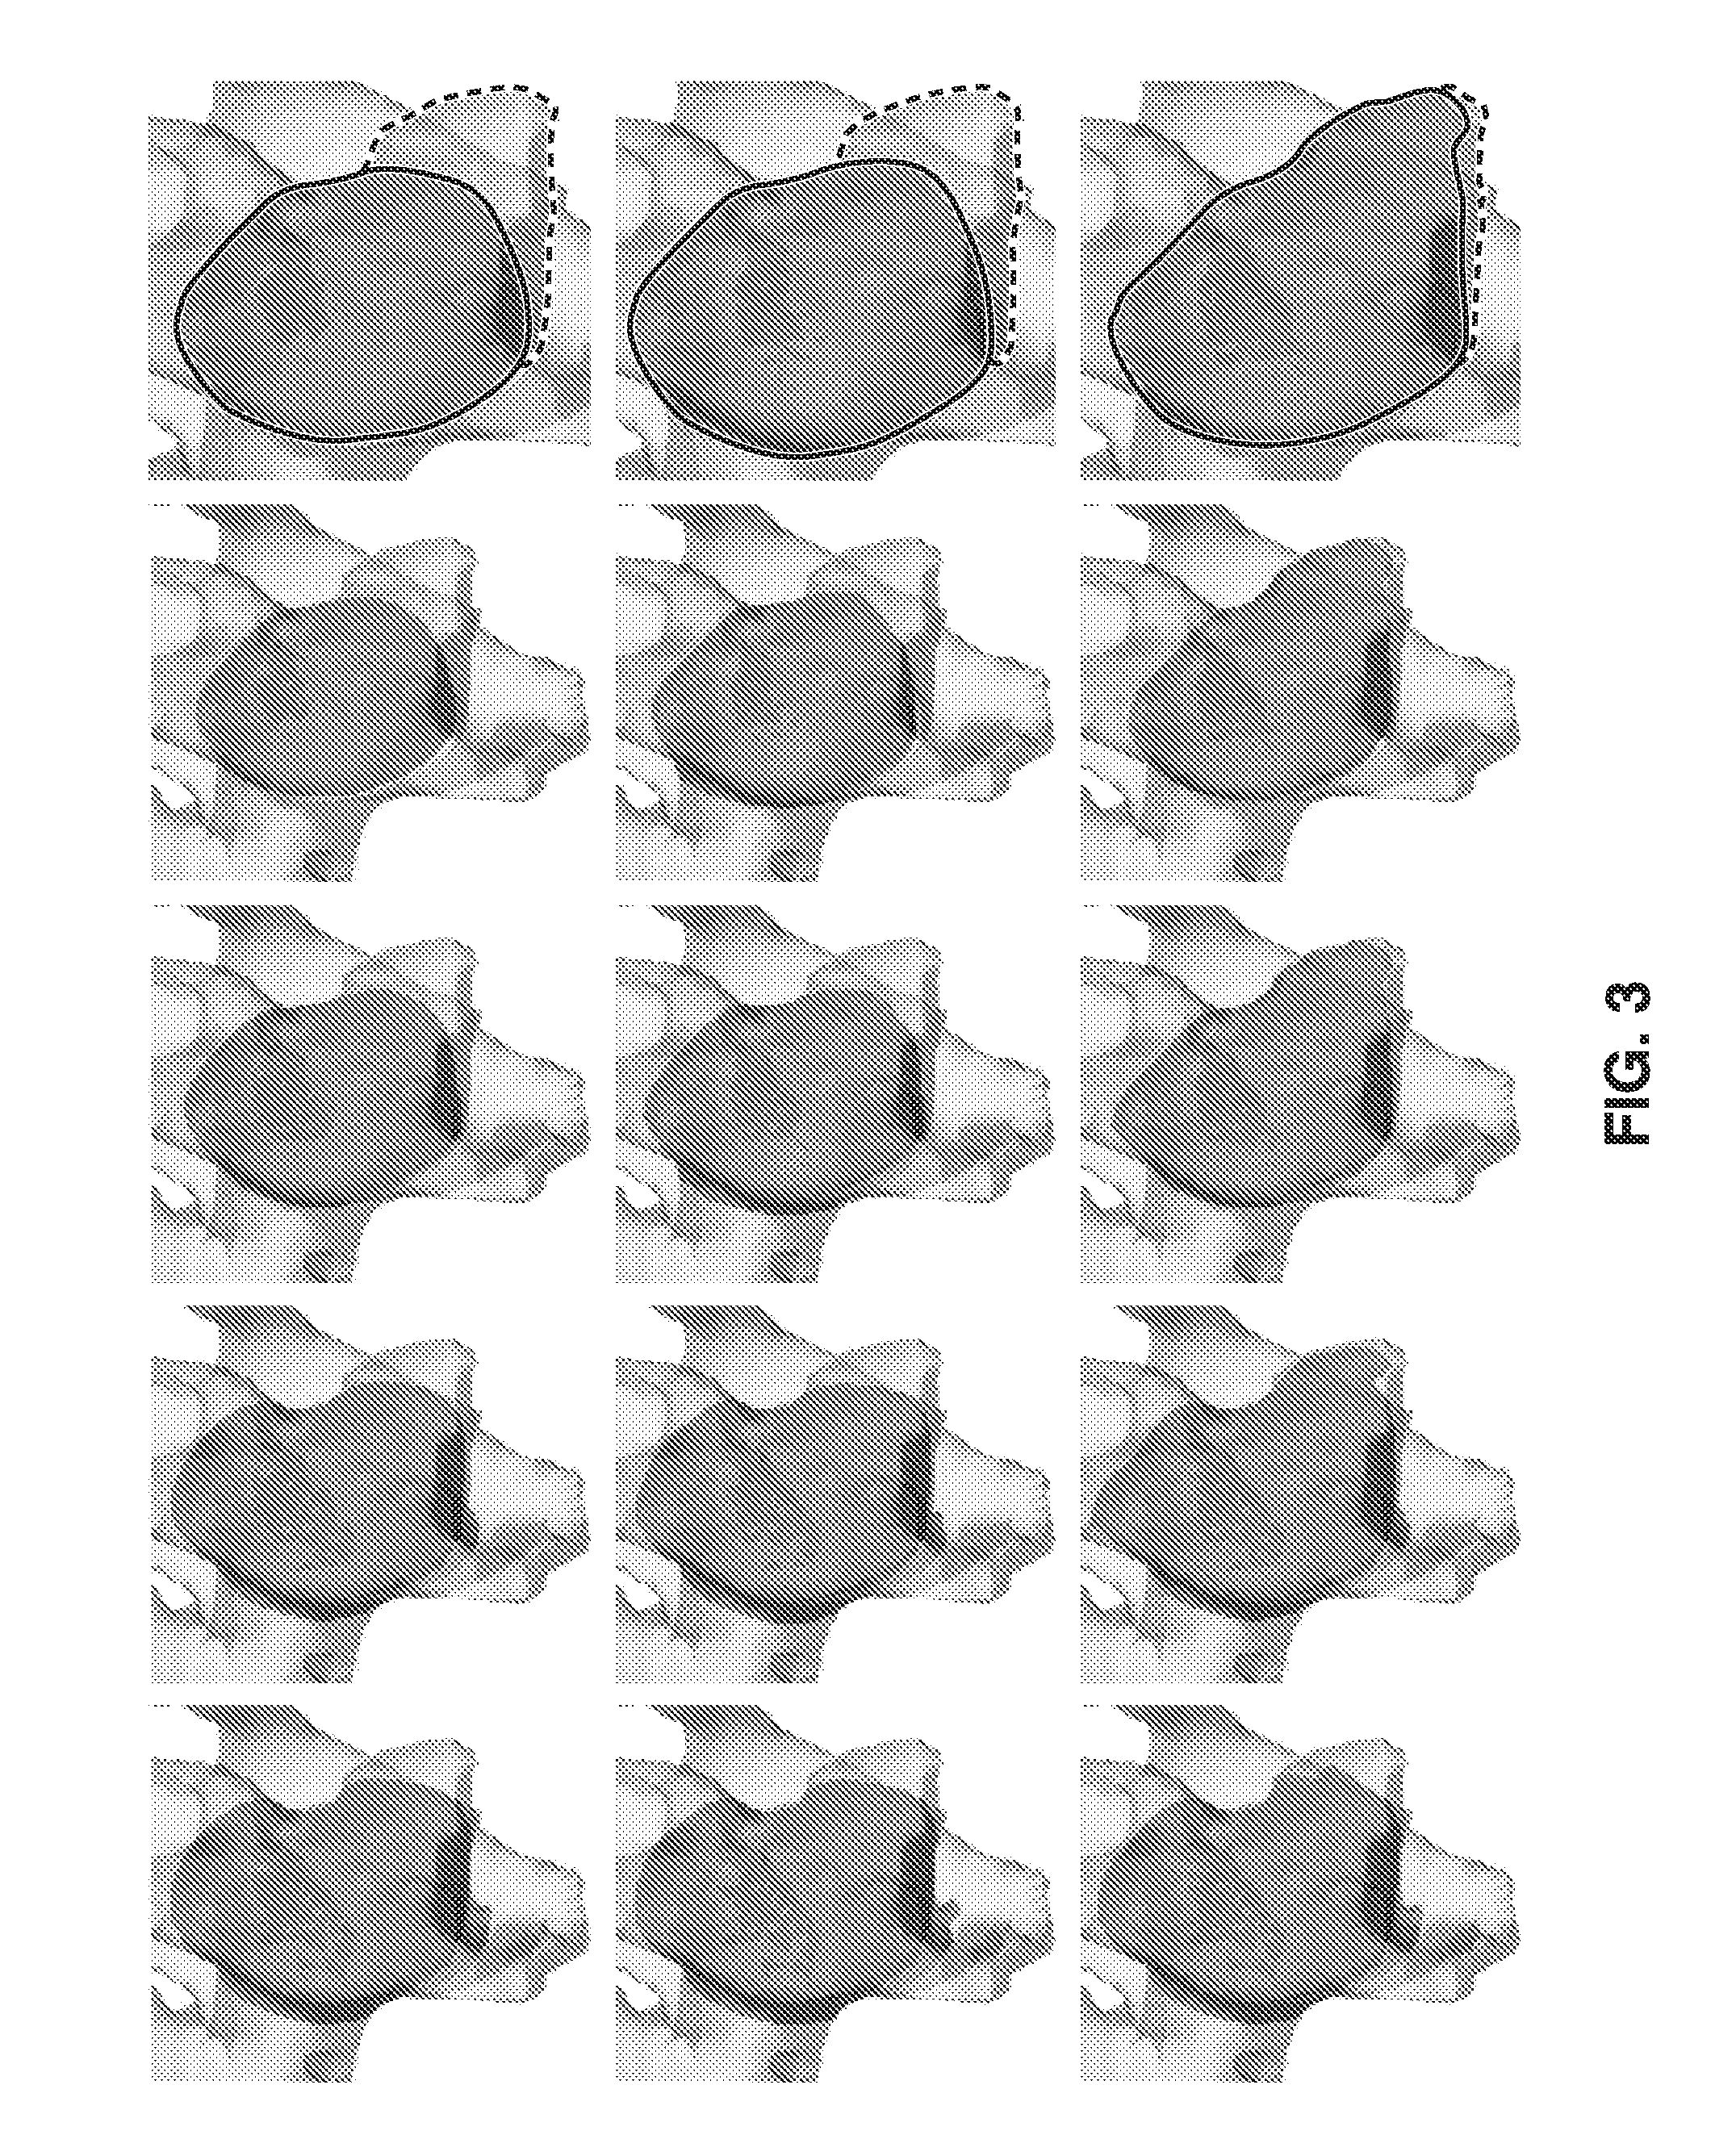 Apparatus and method for surface capturing and volumetric analysis of multidimensional images